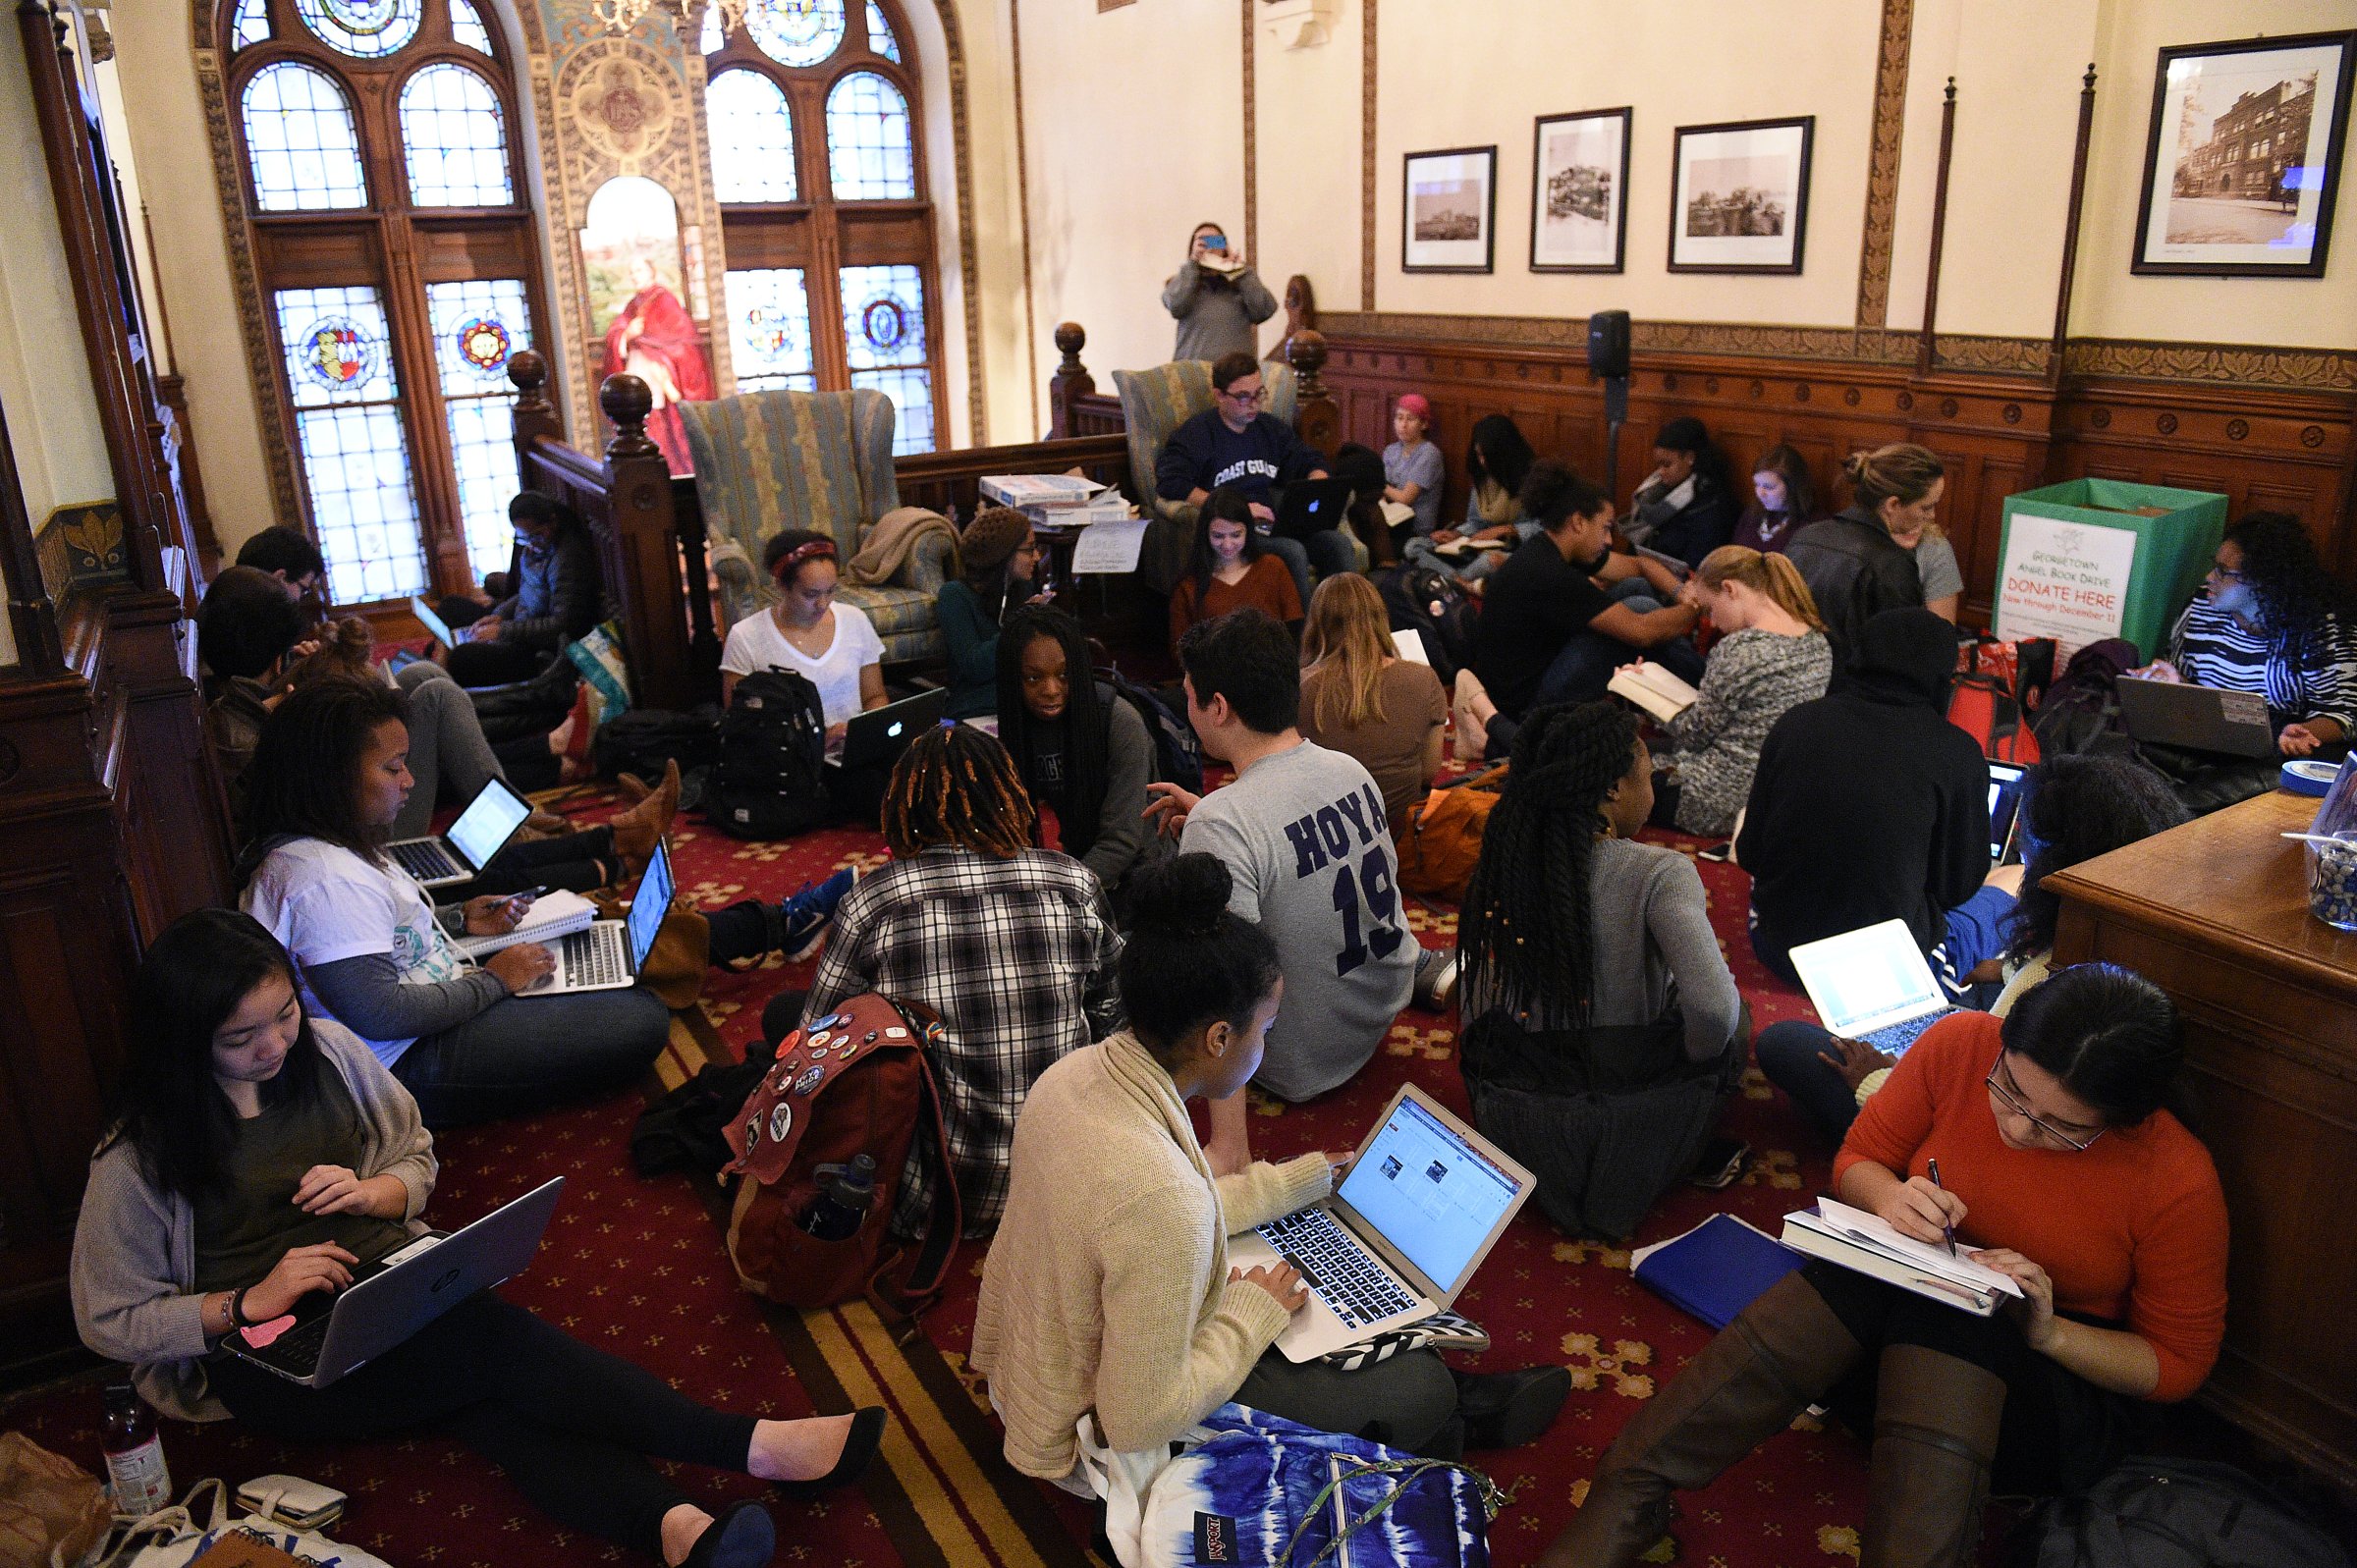 Around 30 students sit in in front of the office of John J. DeGioia, president of Georgetown University in Washington D.C. on Nov. 13, 2015. The sit in was in solidarity with other student protests throughout the country addressing racial discrimination on campus, including at University of Missouri and Yale University. The students also demanded the change of the name of Mulledy Hall on campus.